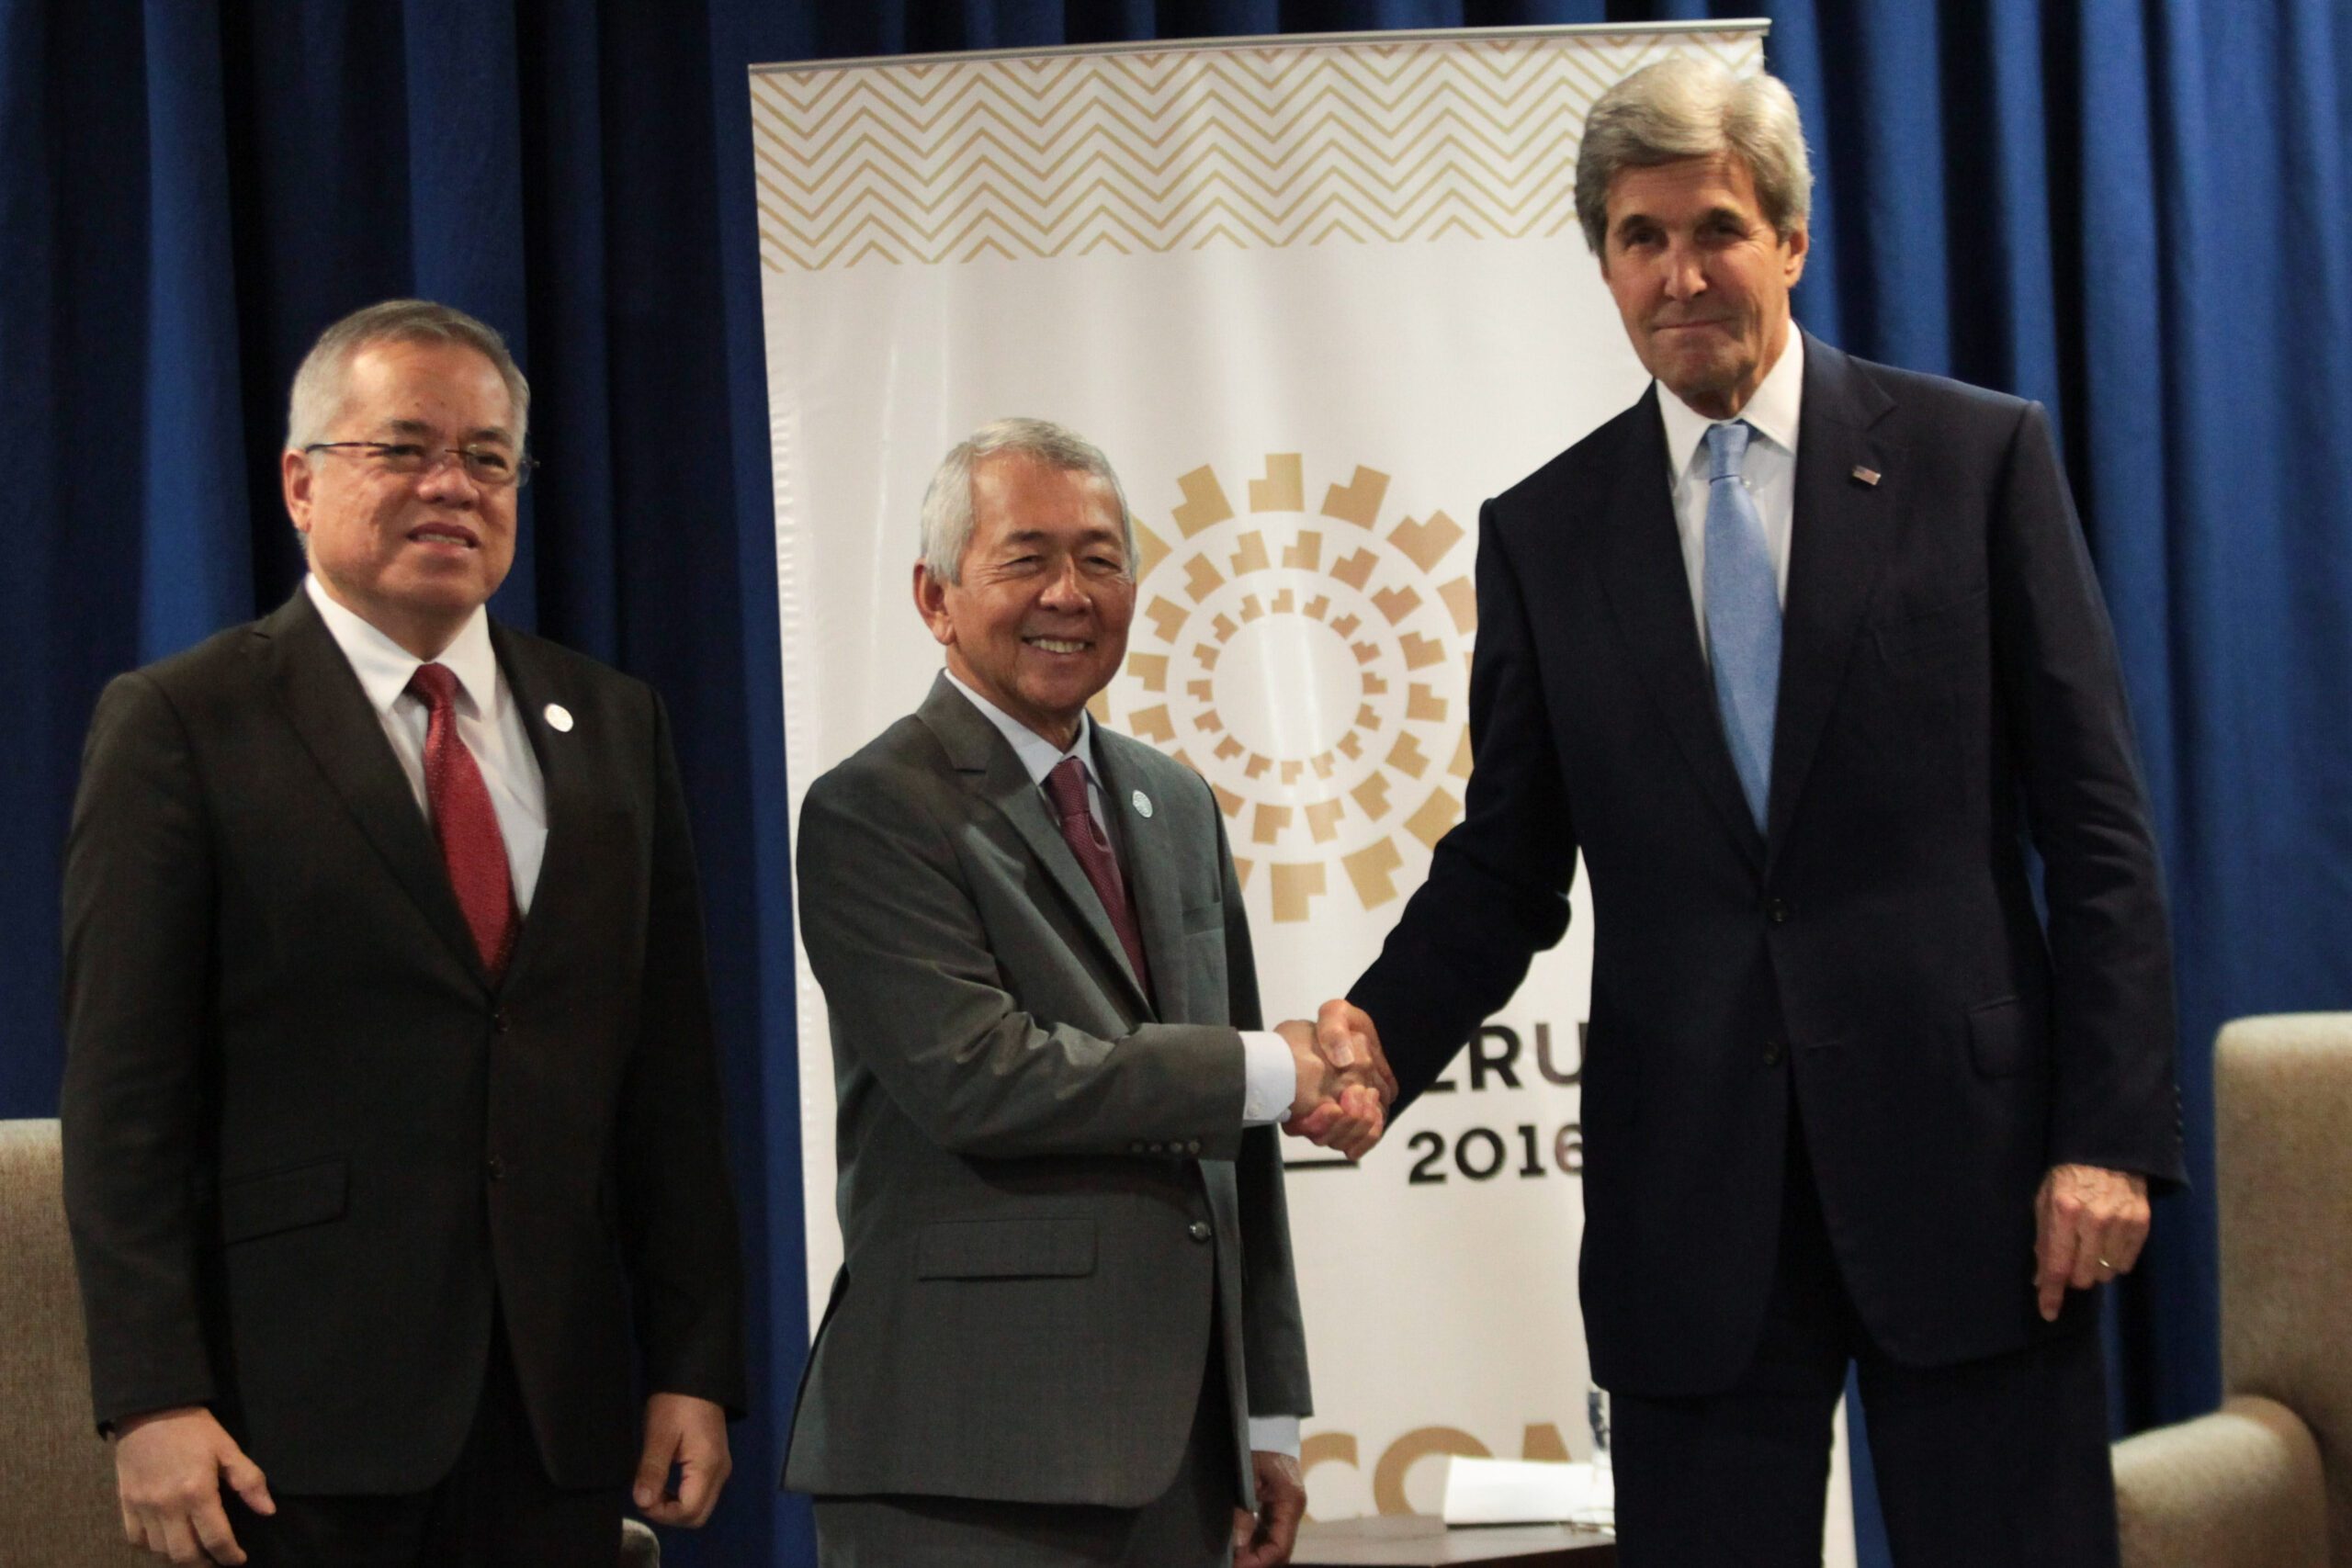 Yasay, Kerry agree to boost Philippines-U.S. ties